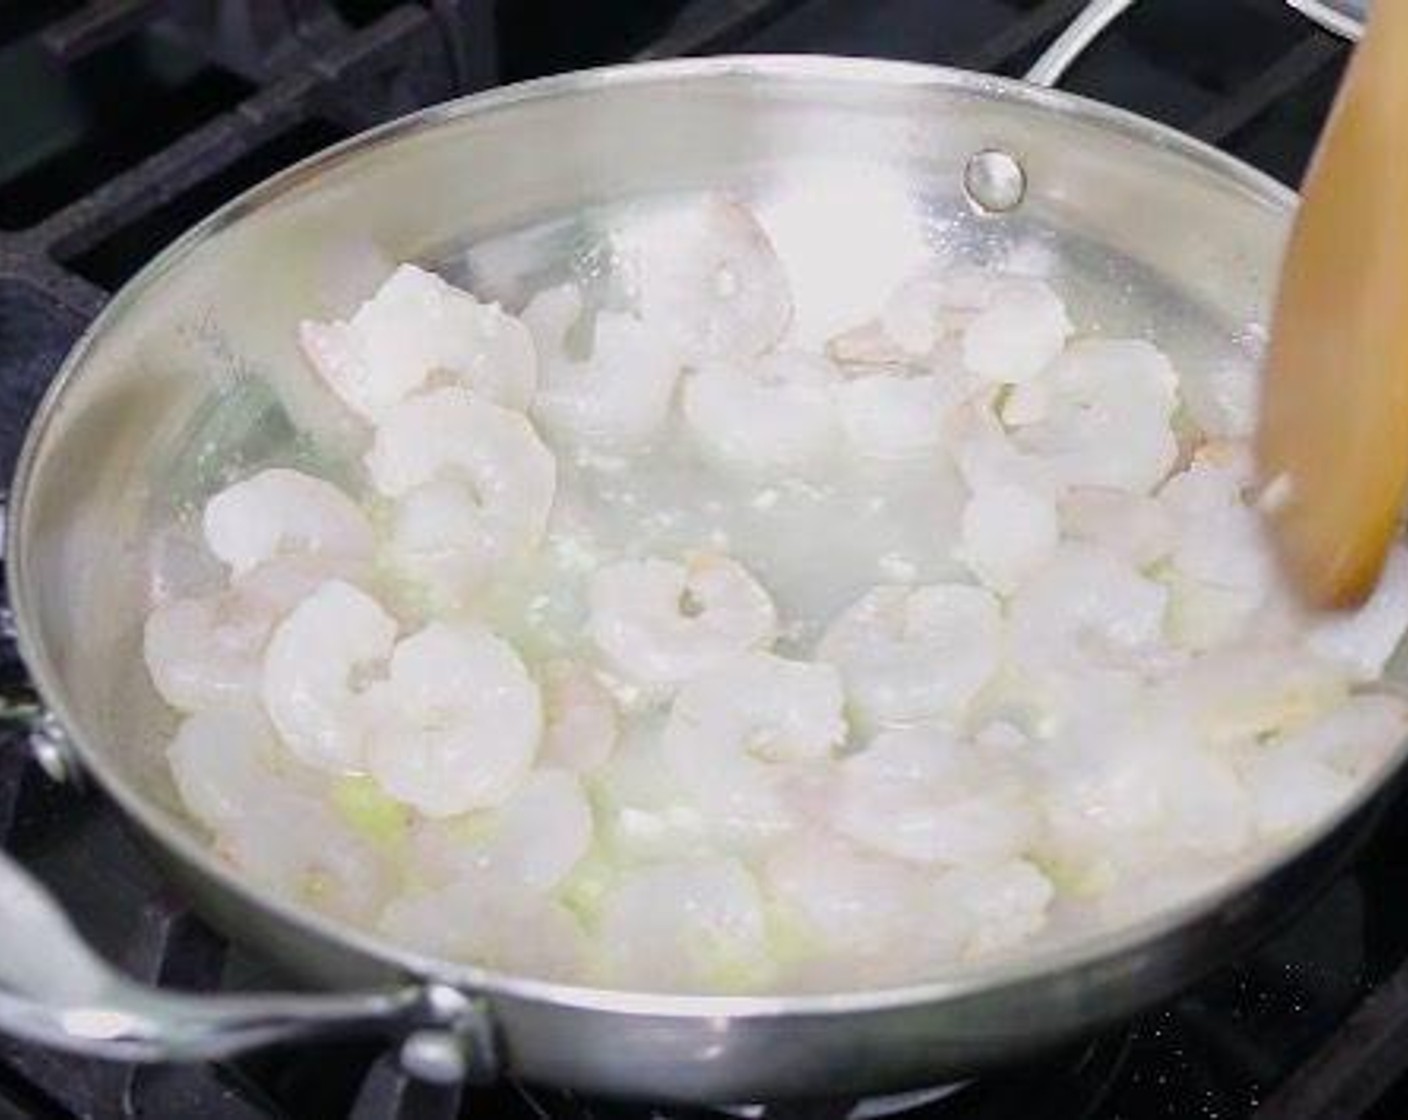 step 1 In a large pan over medium heat, add Butter (2 Tbsp) and allow it to melt. Add Garlic (1 clove) and the Shrimp (1 lb). Cook until shrimps are pink on both sides, about 3 minutes. Set aside.